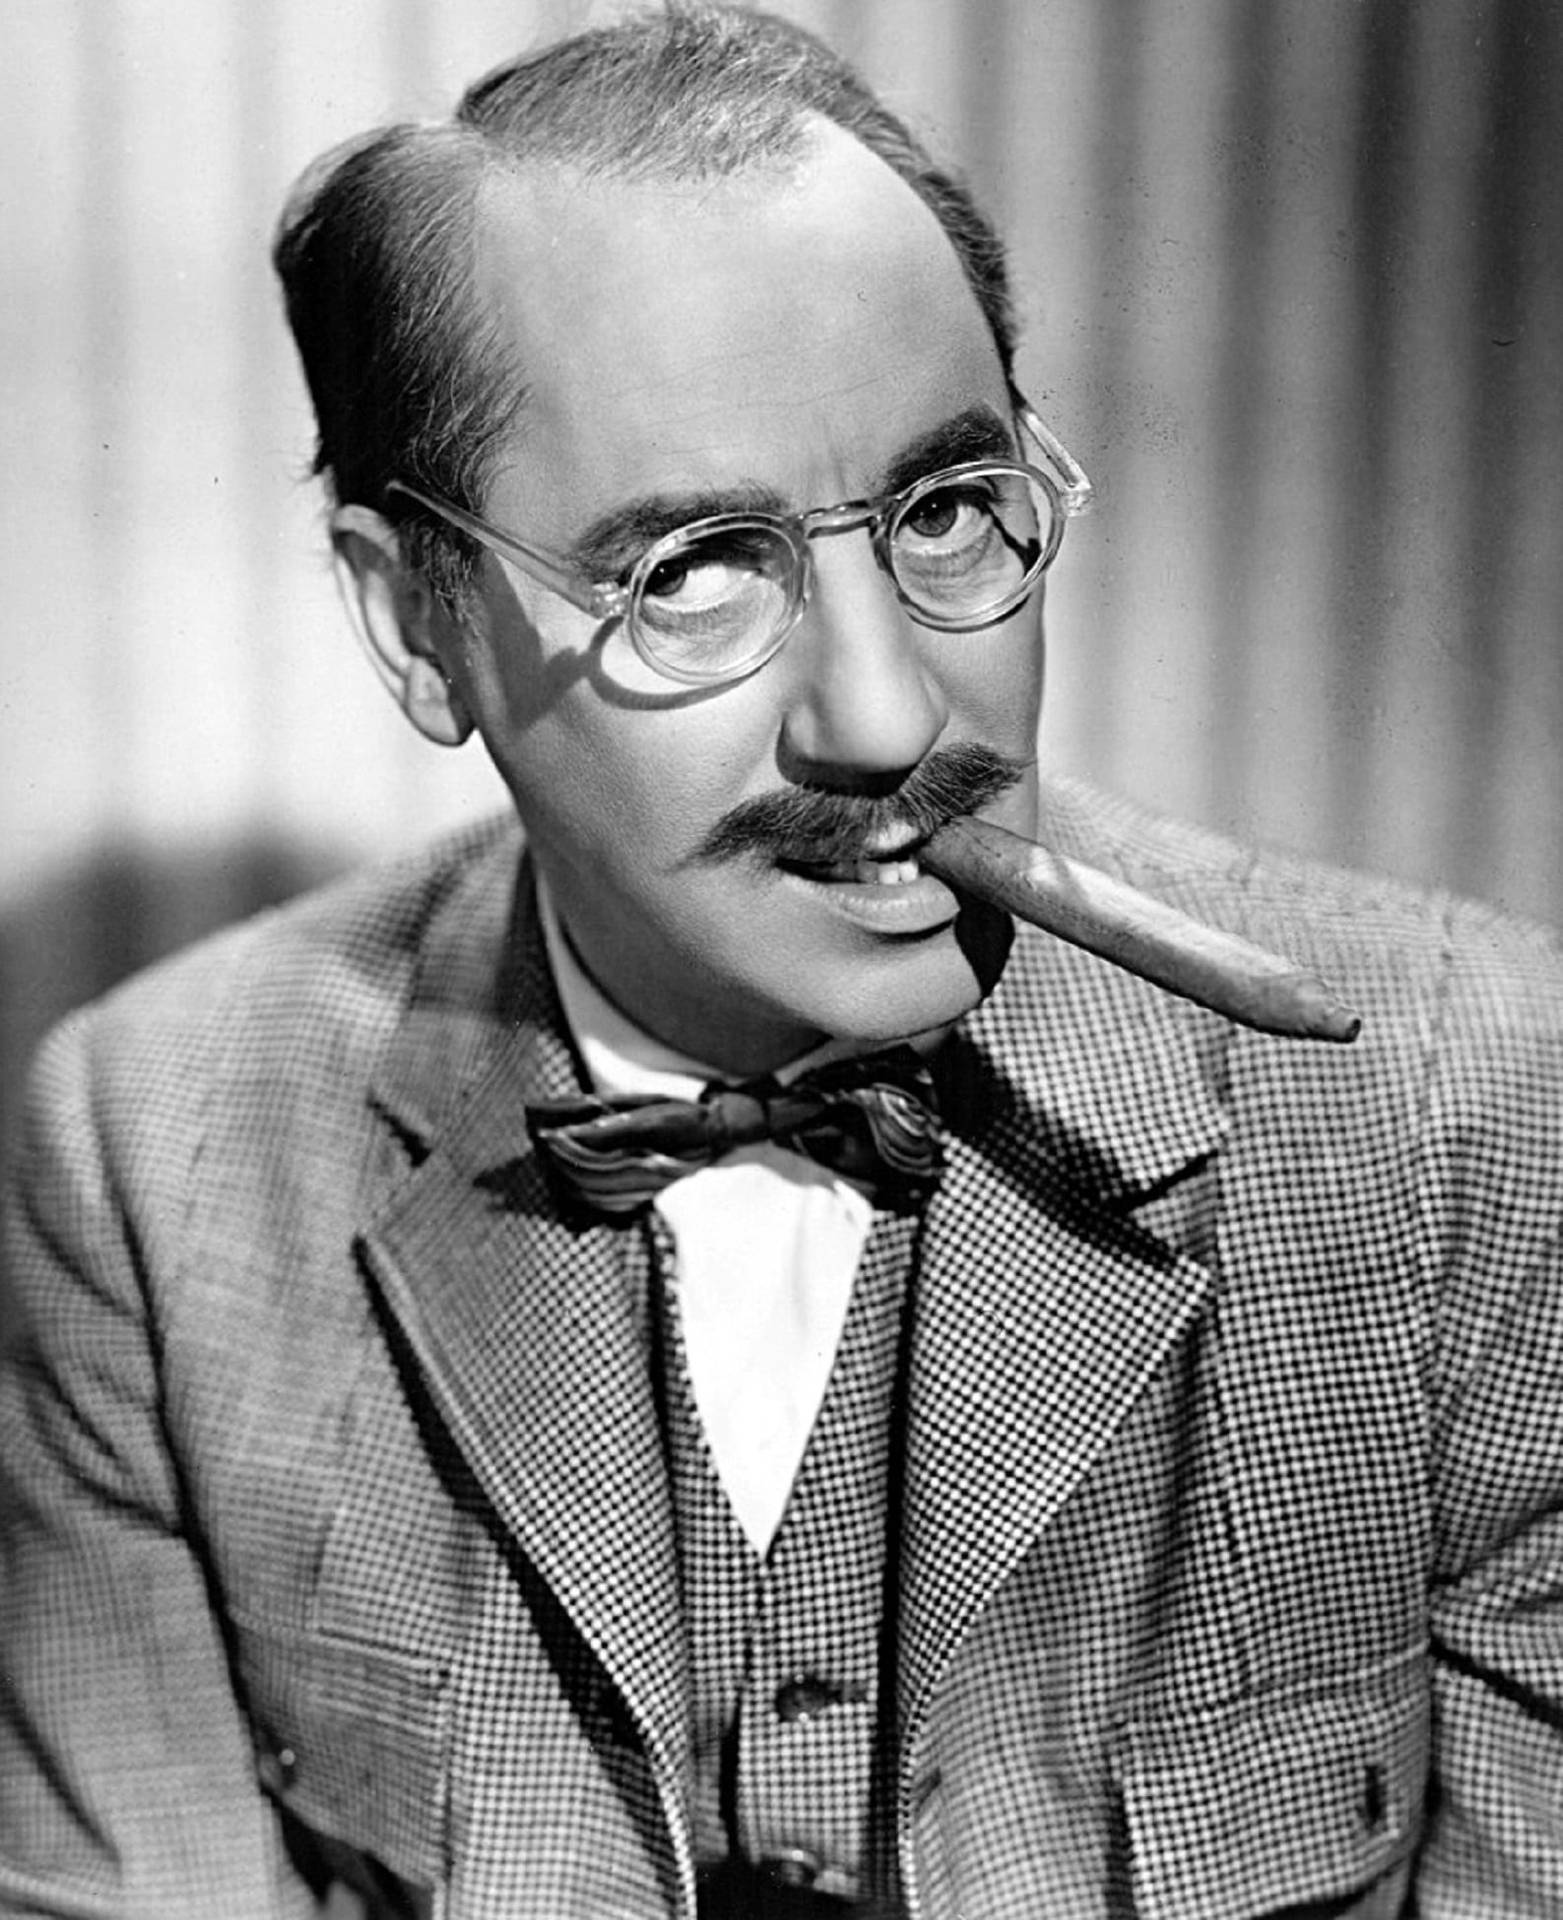 Groucho Marx - The Legendary Comedian Of Marx Brothers Background